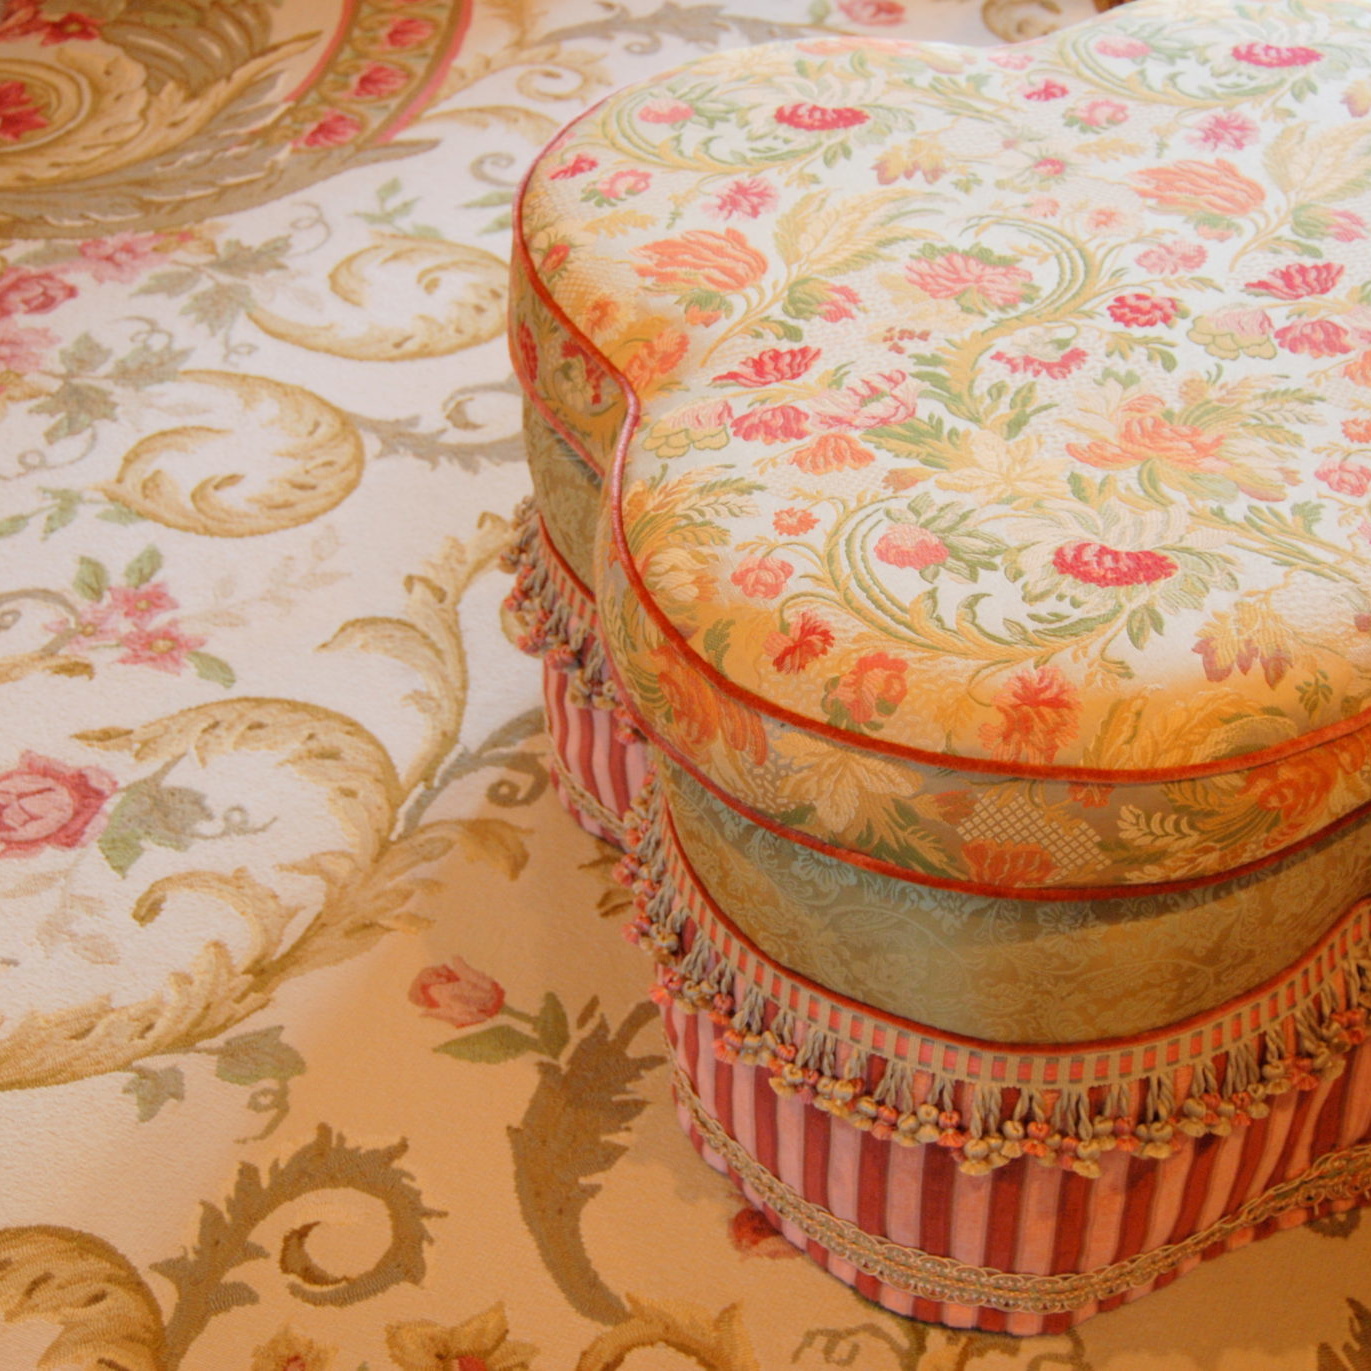 Decorative floral ottoman on matching area rug